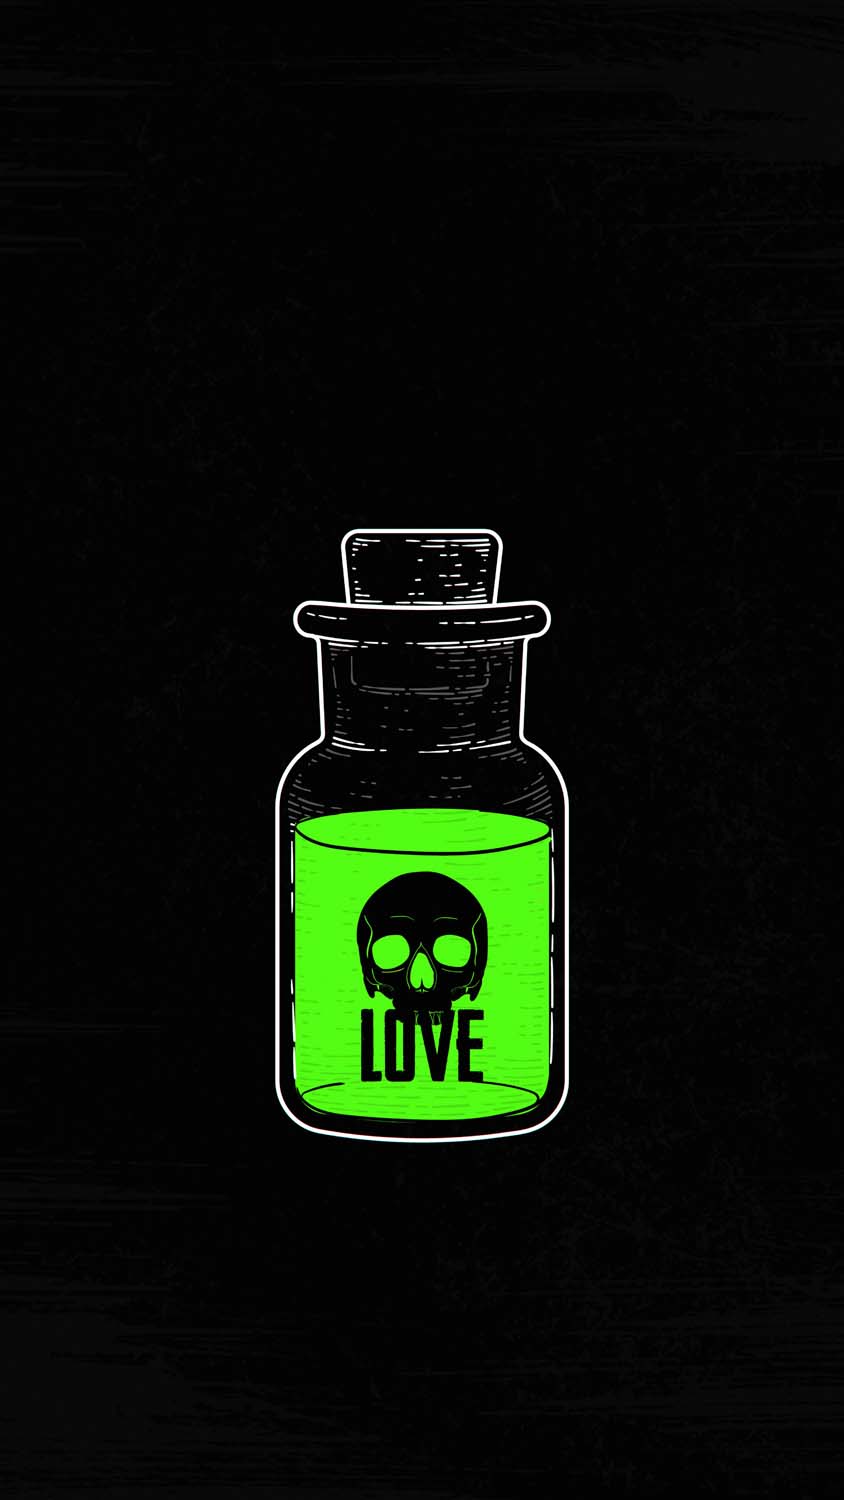 Love is Poison iPhone Wallpaper HD